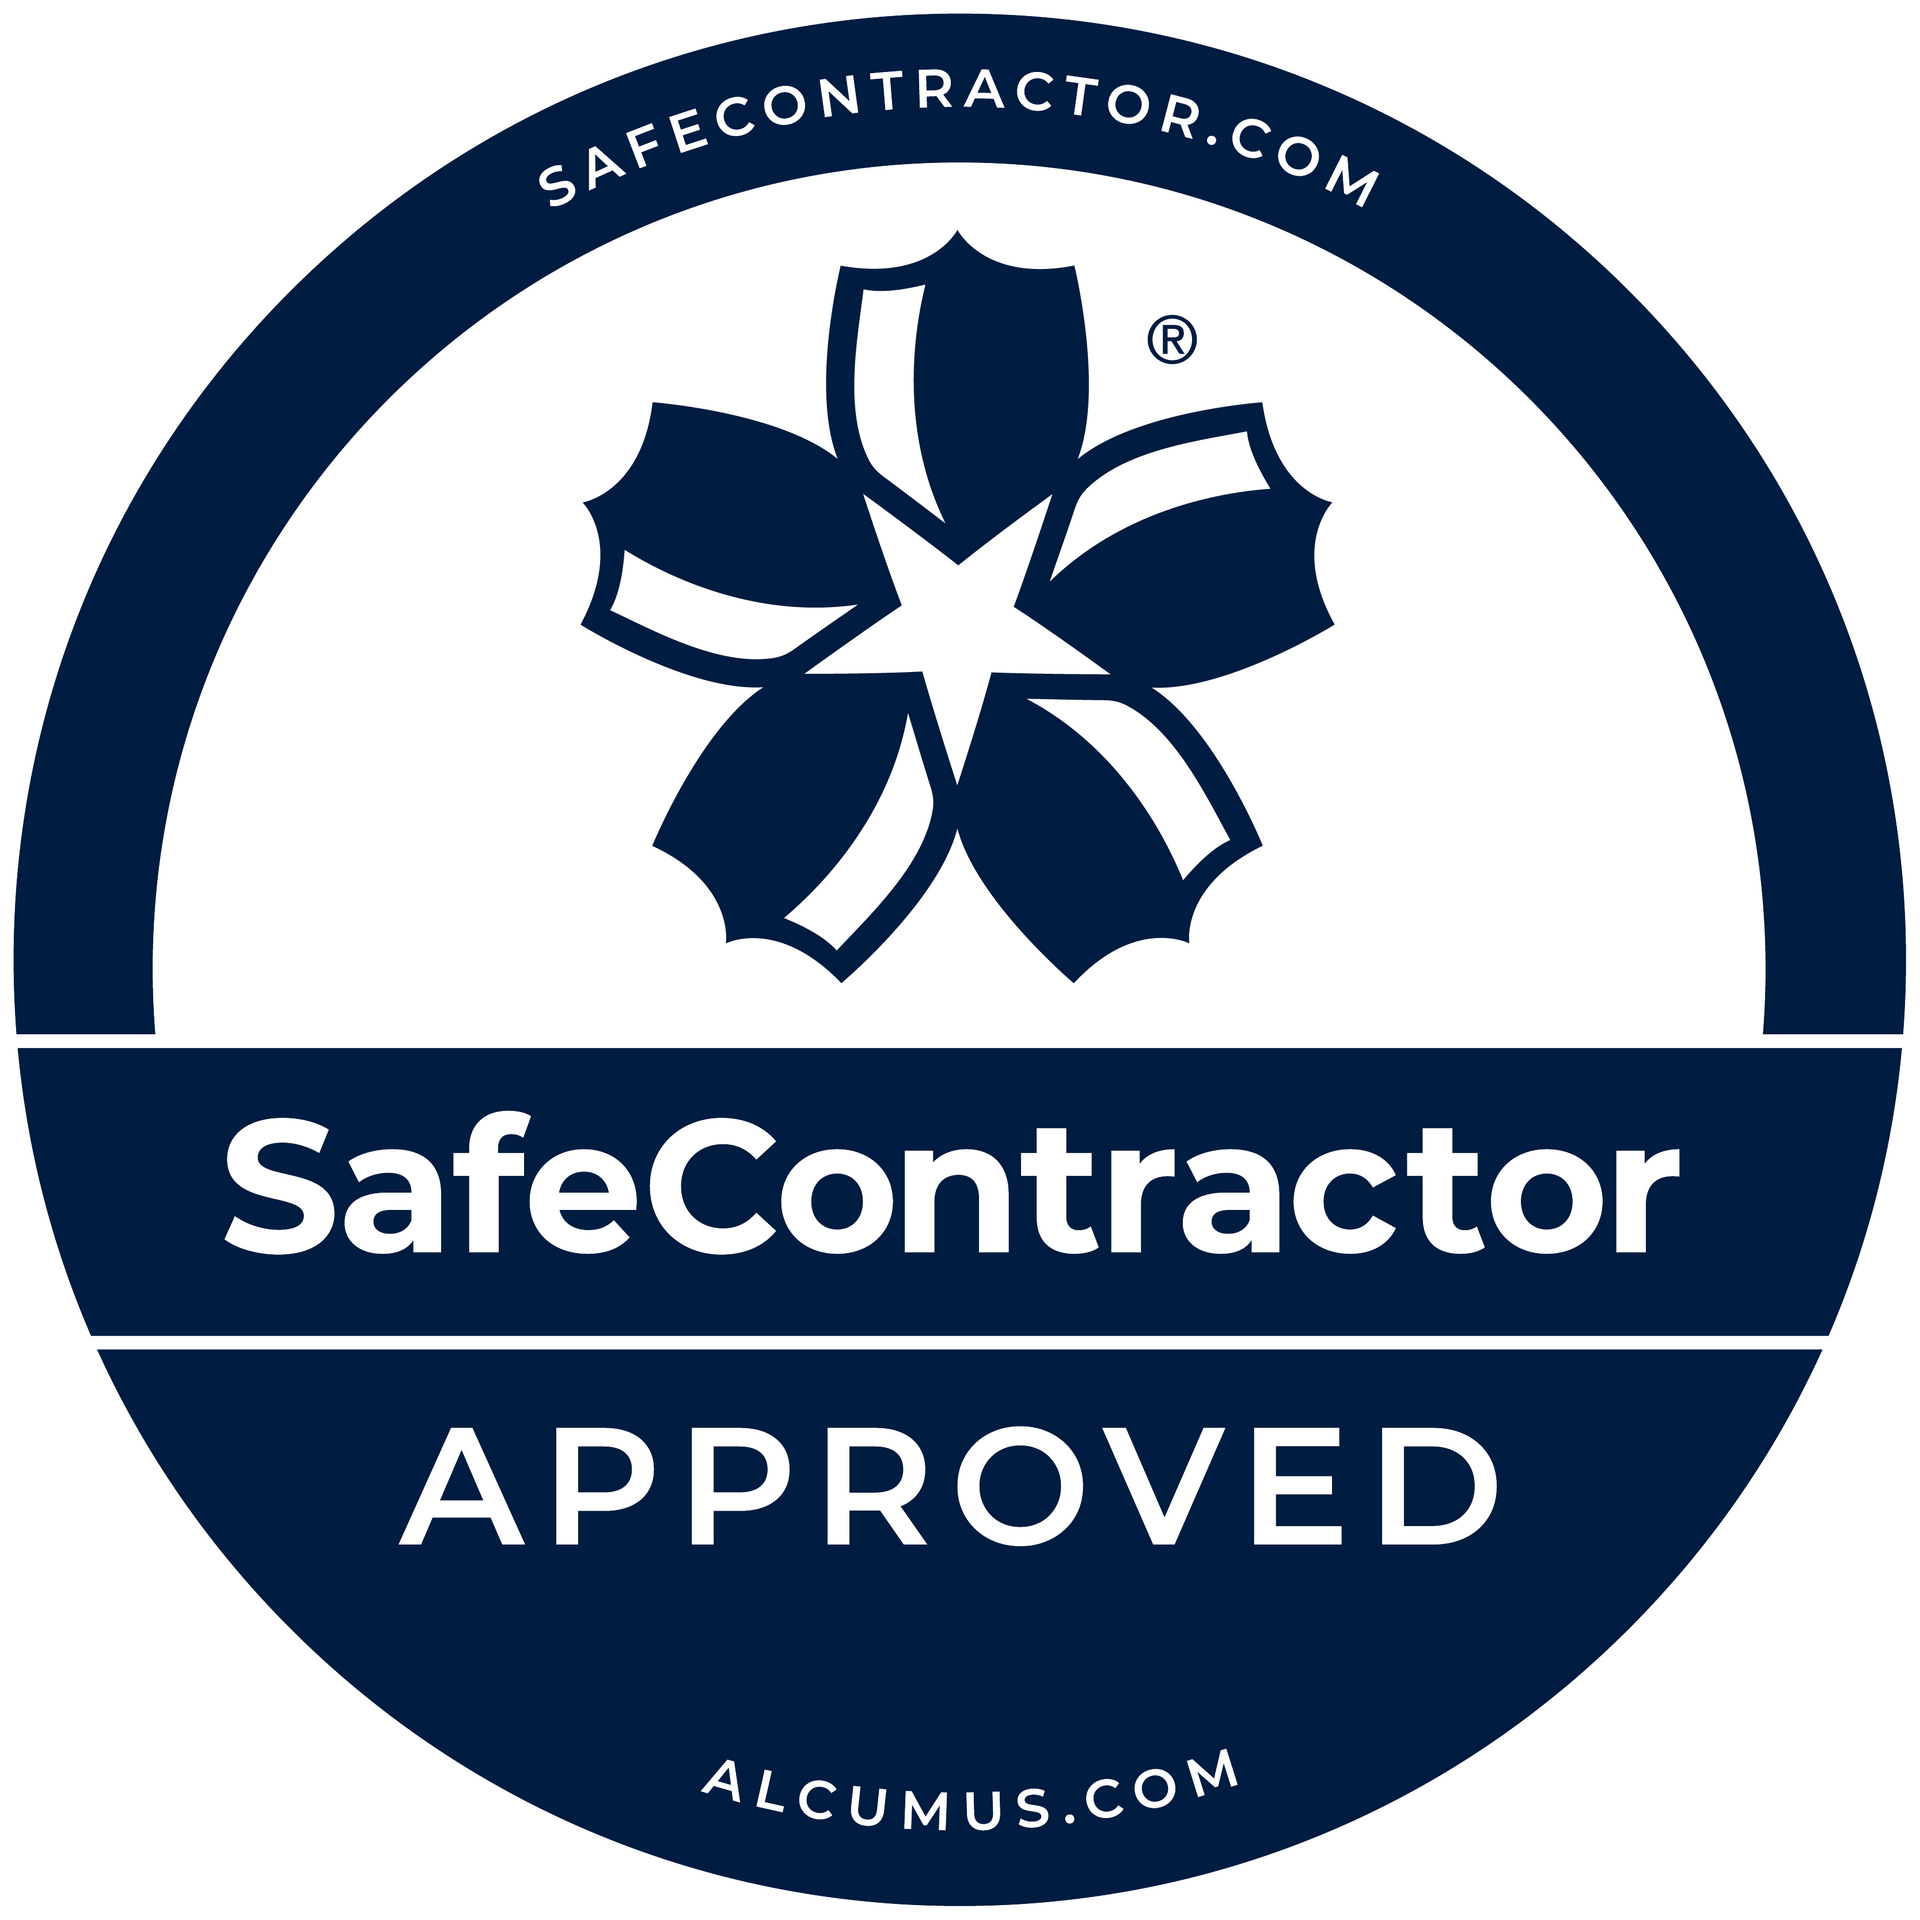 SafeContractor Approved seal